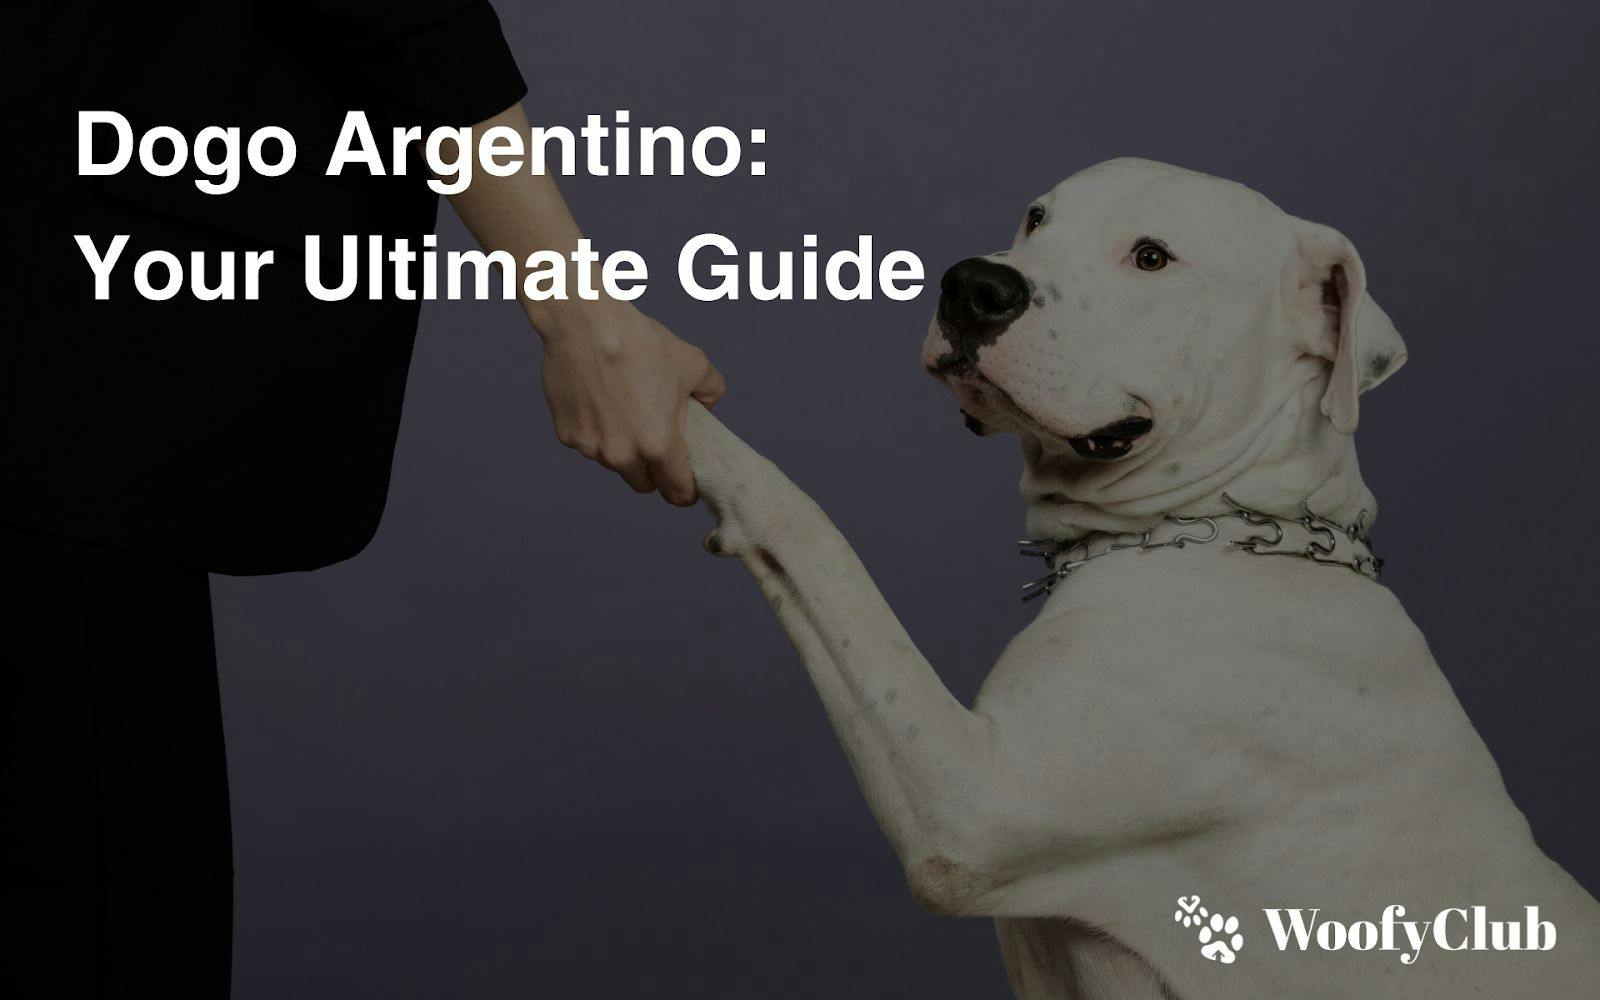 Dogo Argentino: Your Ultimate Guide